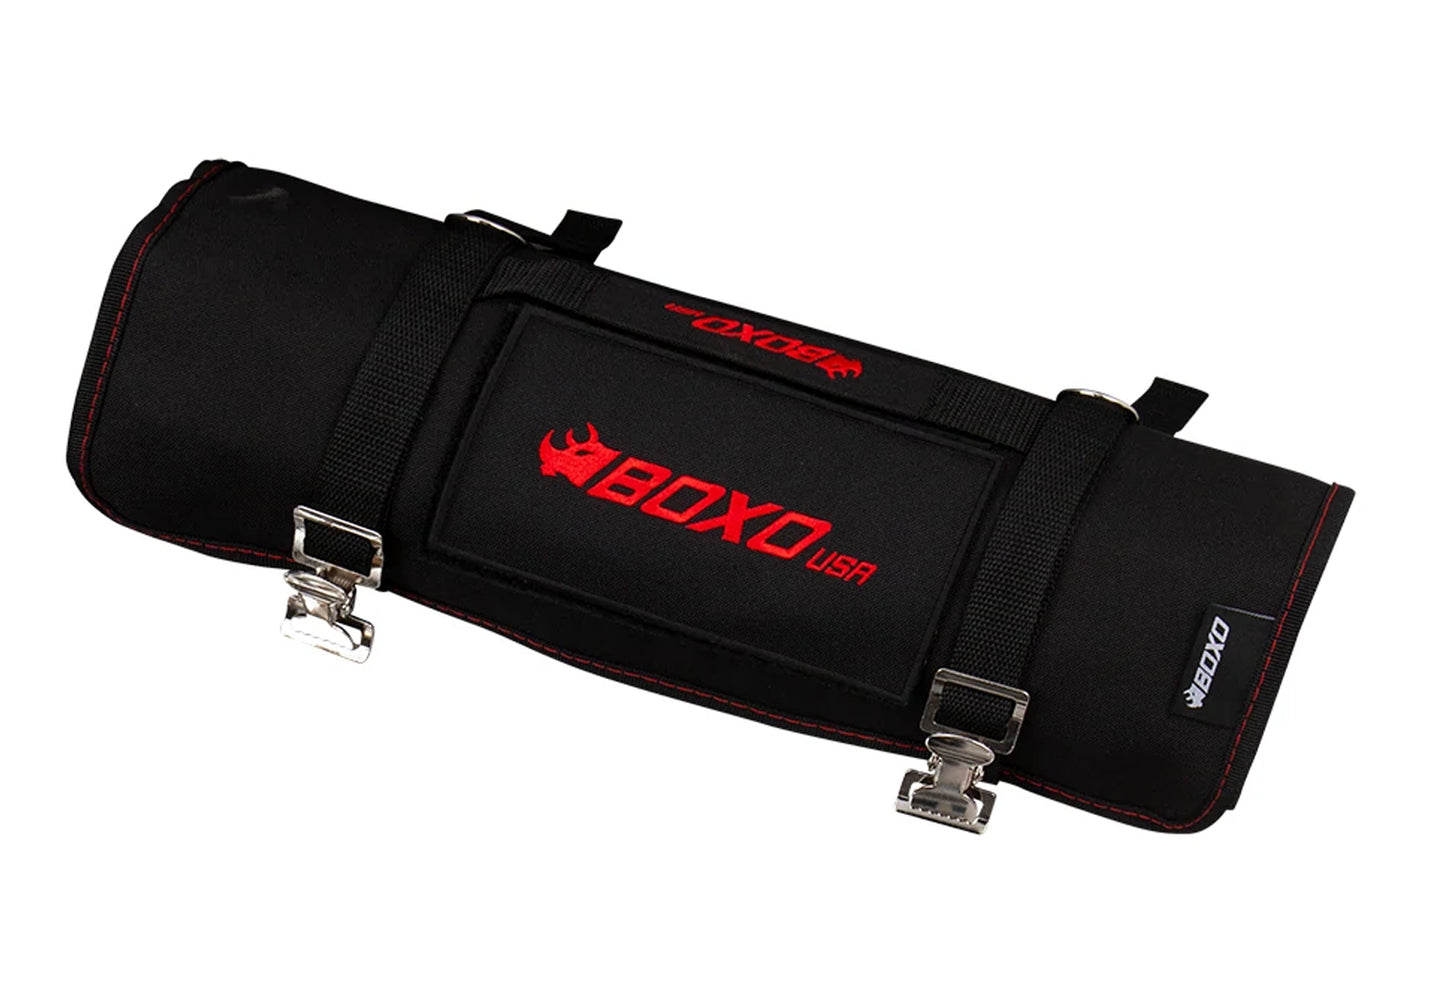 Boxo PA915 Tool Roll 2.0, Powersports Rolled Up